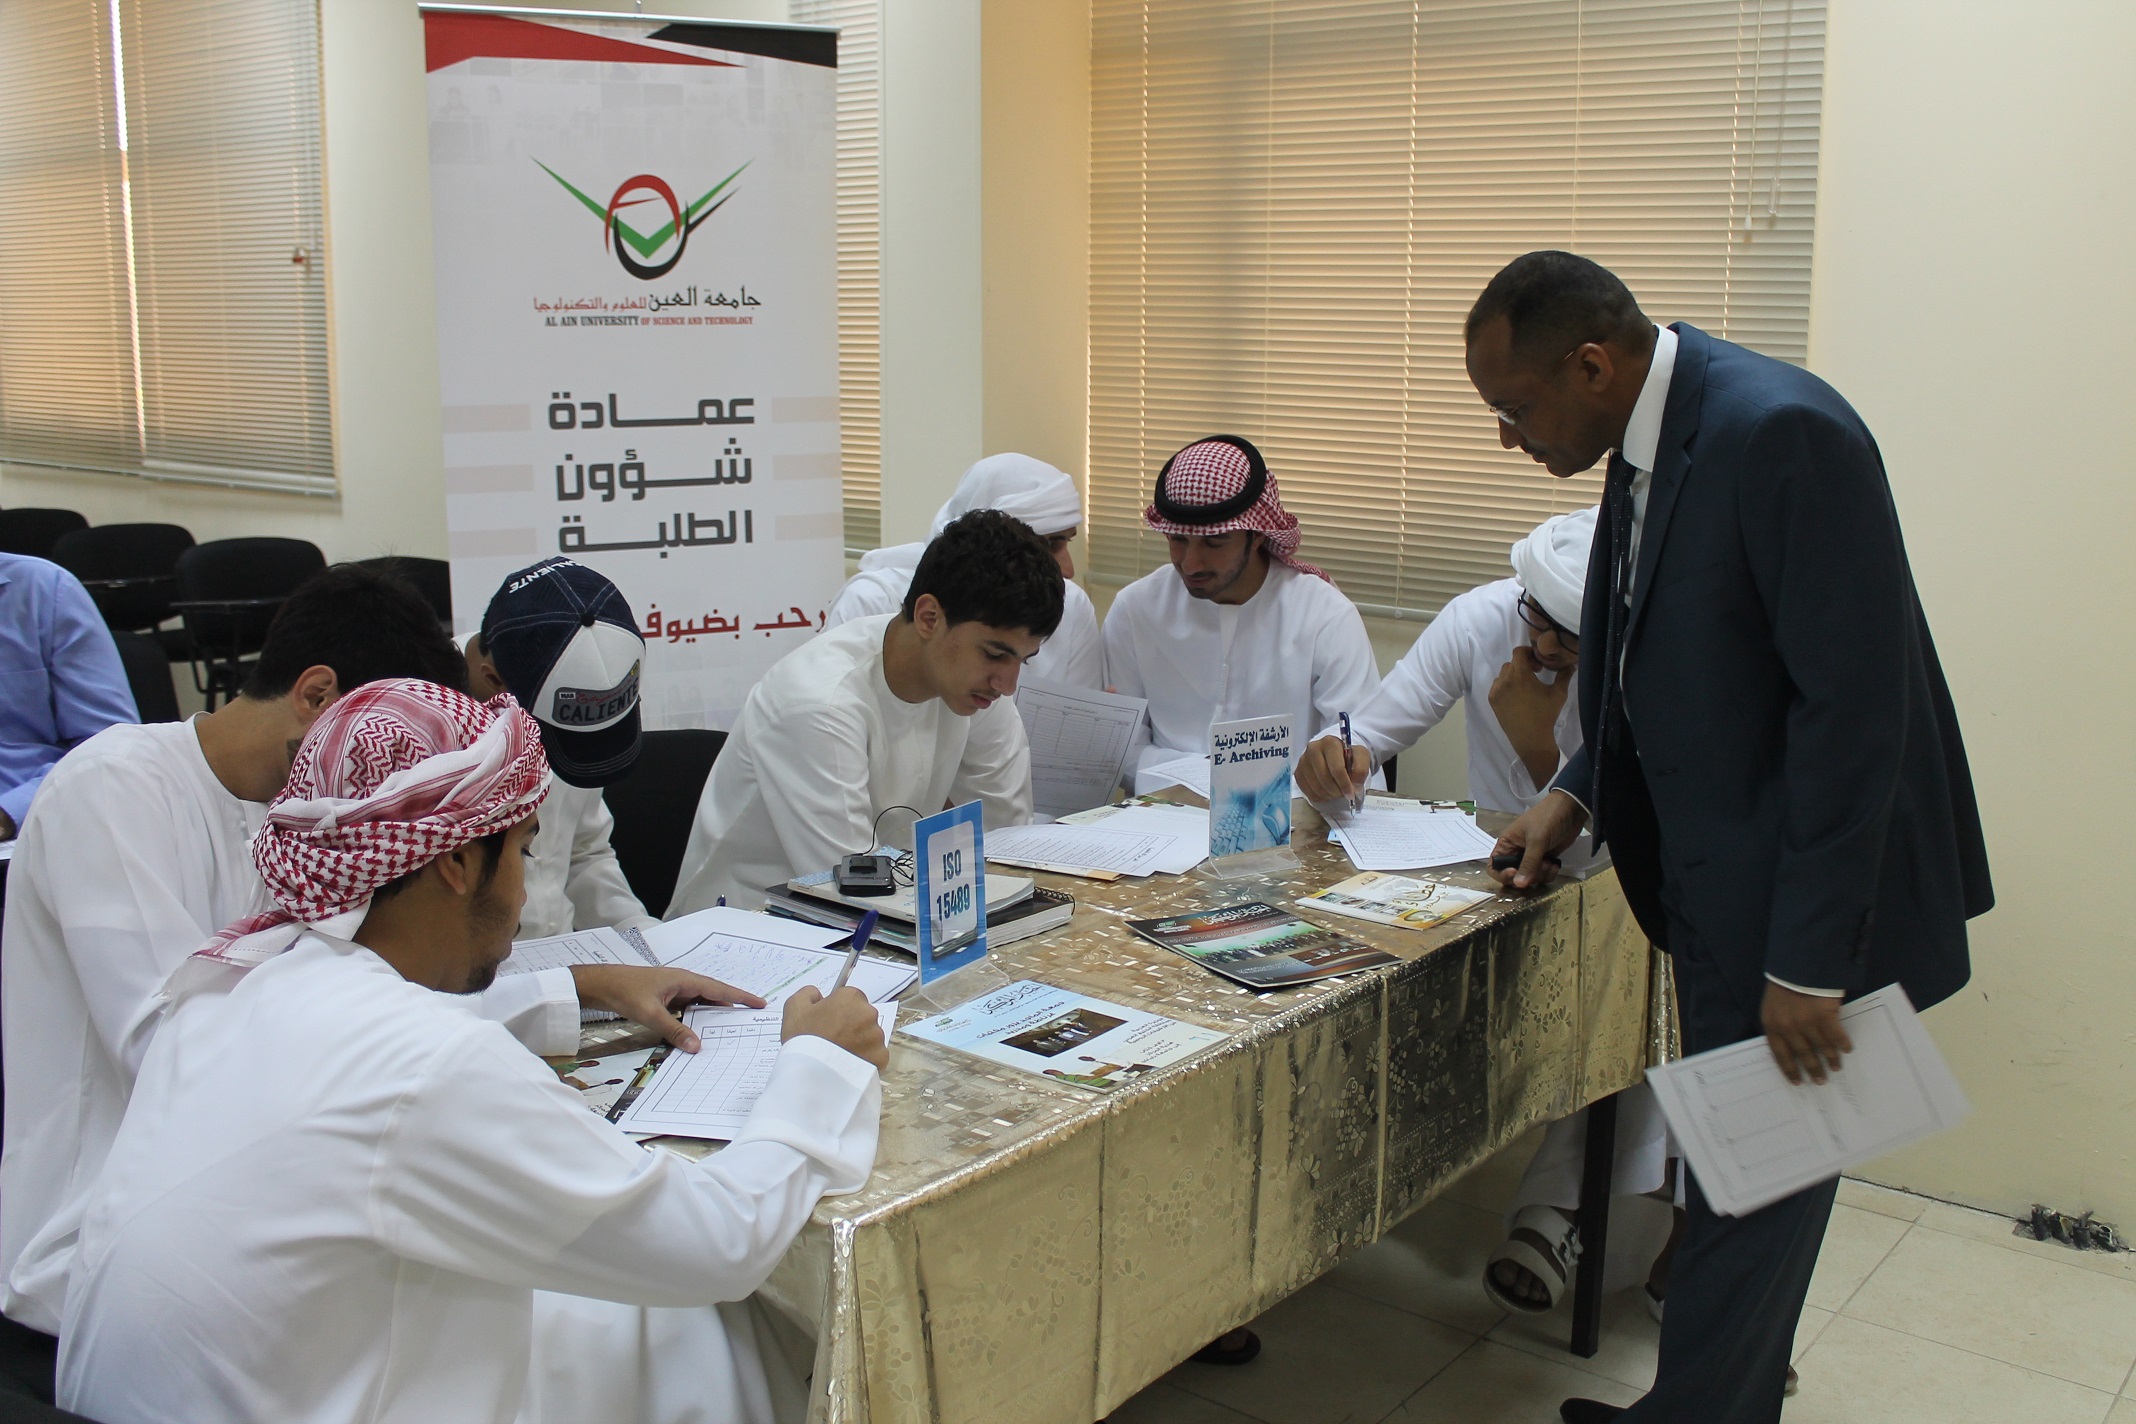 A Workshop Entitled "Electronic Archiving" in Al Ain University